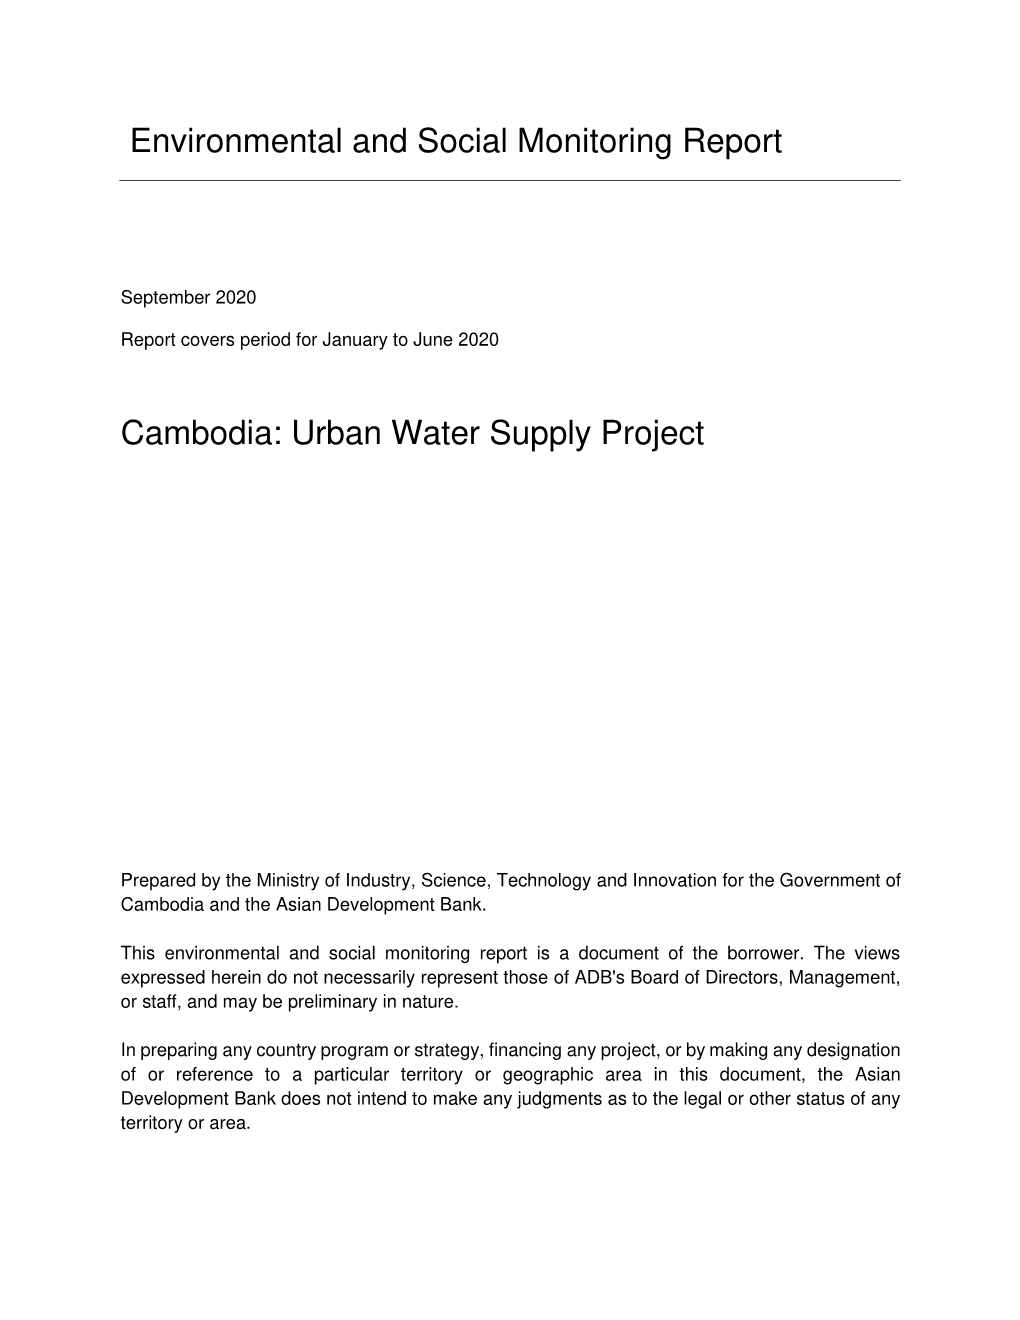 Cambodia: Urban Water Supply Project